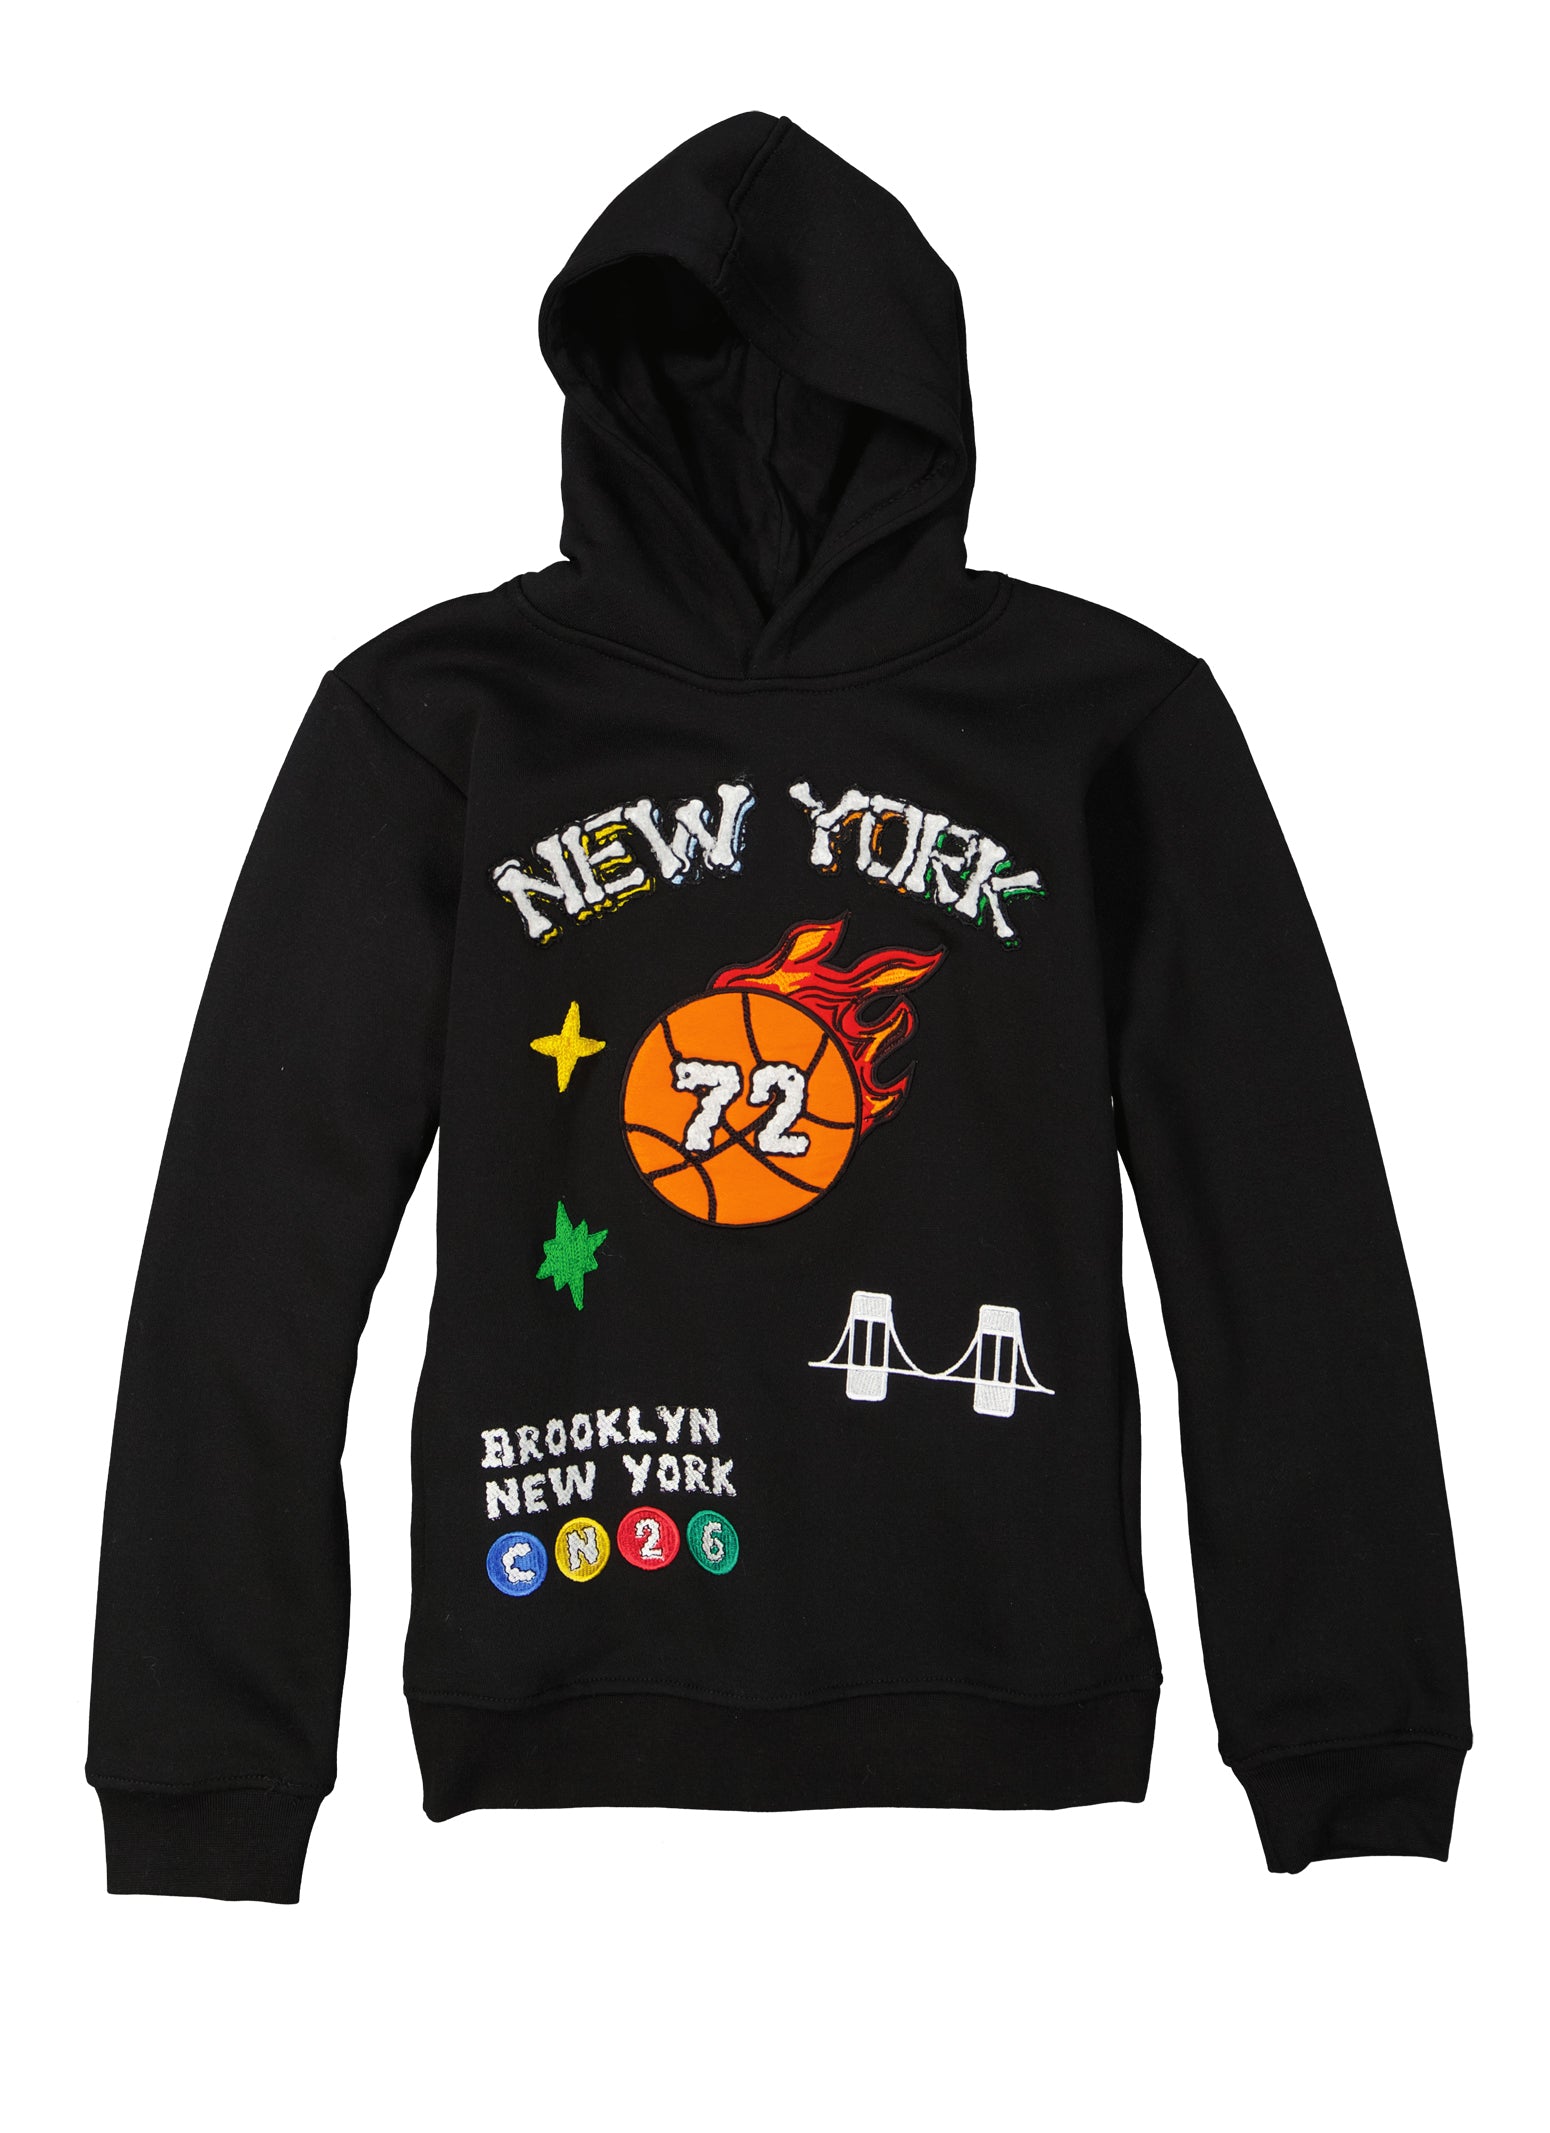 Boys New York Embroidered Patch Graphic Hoodie, Black, Size 8